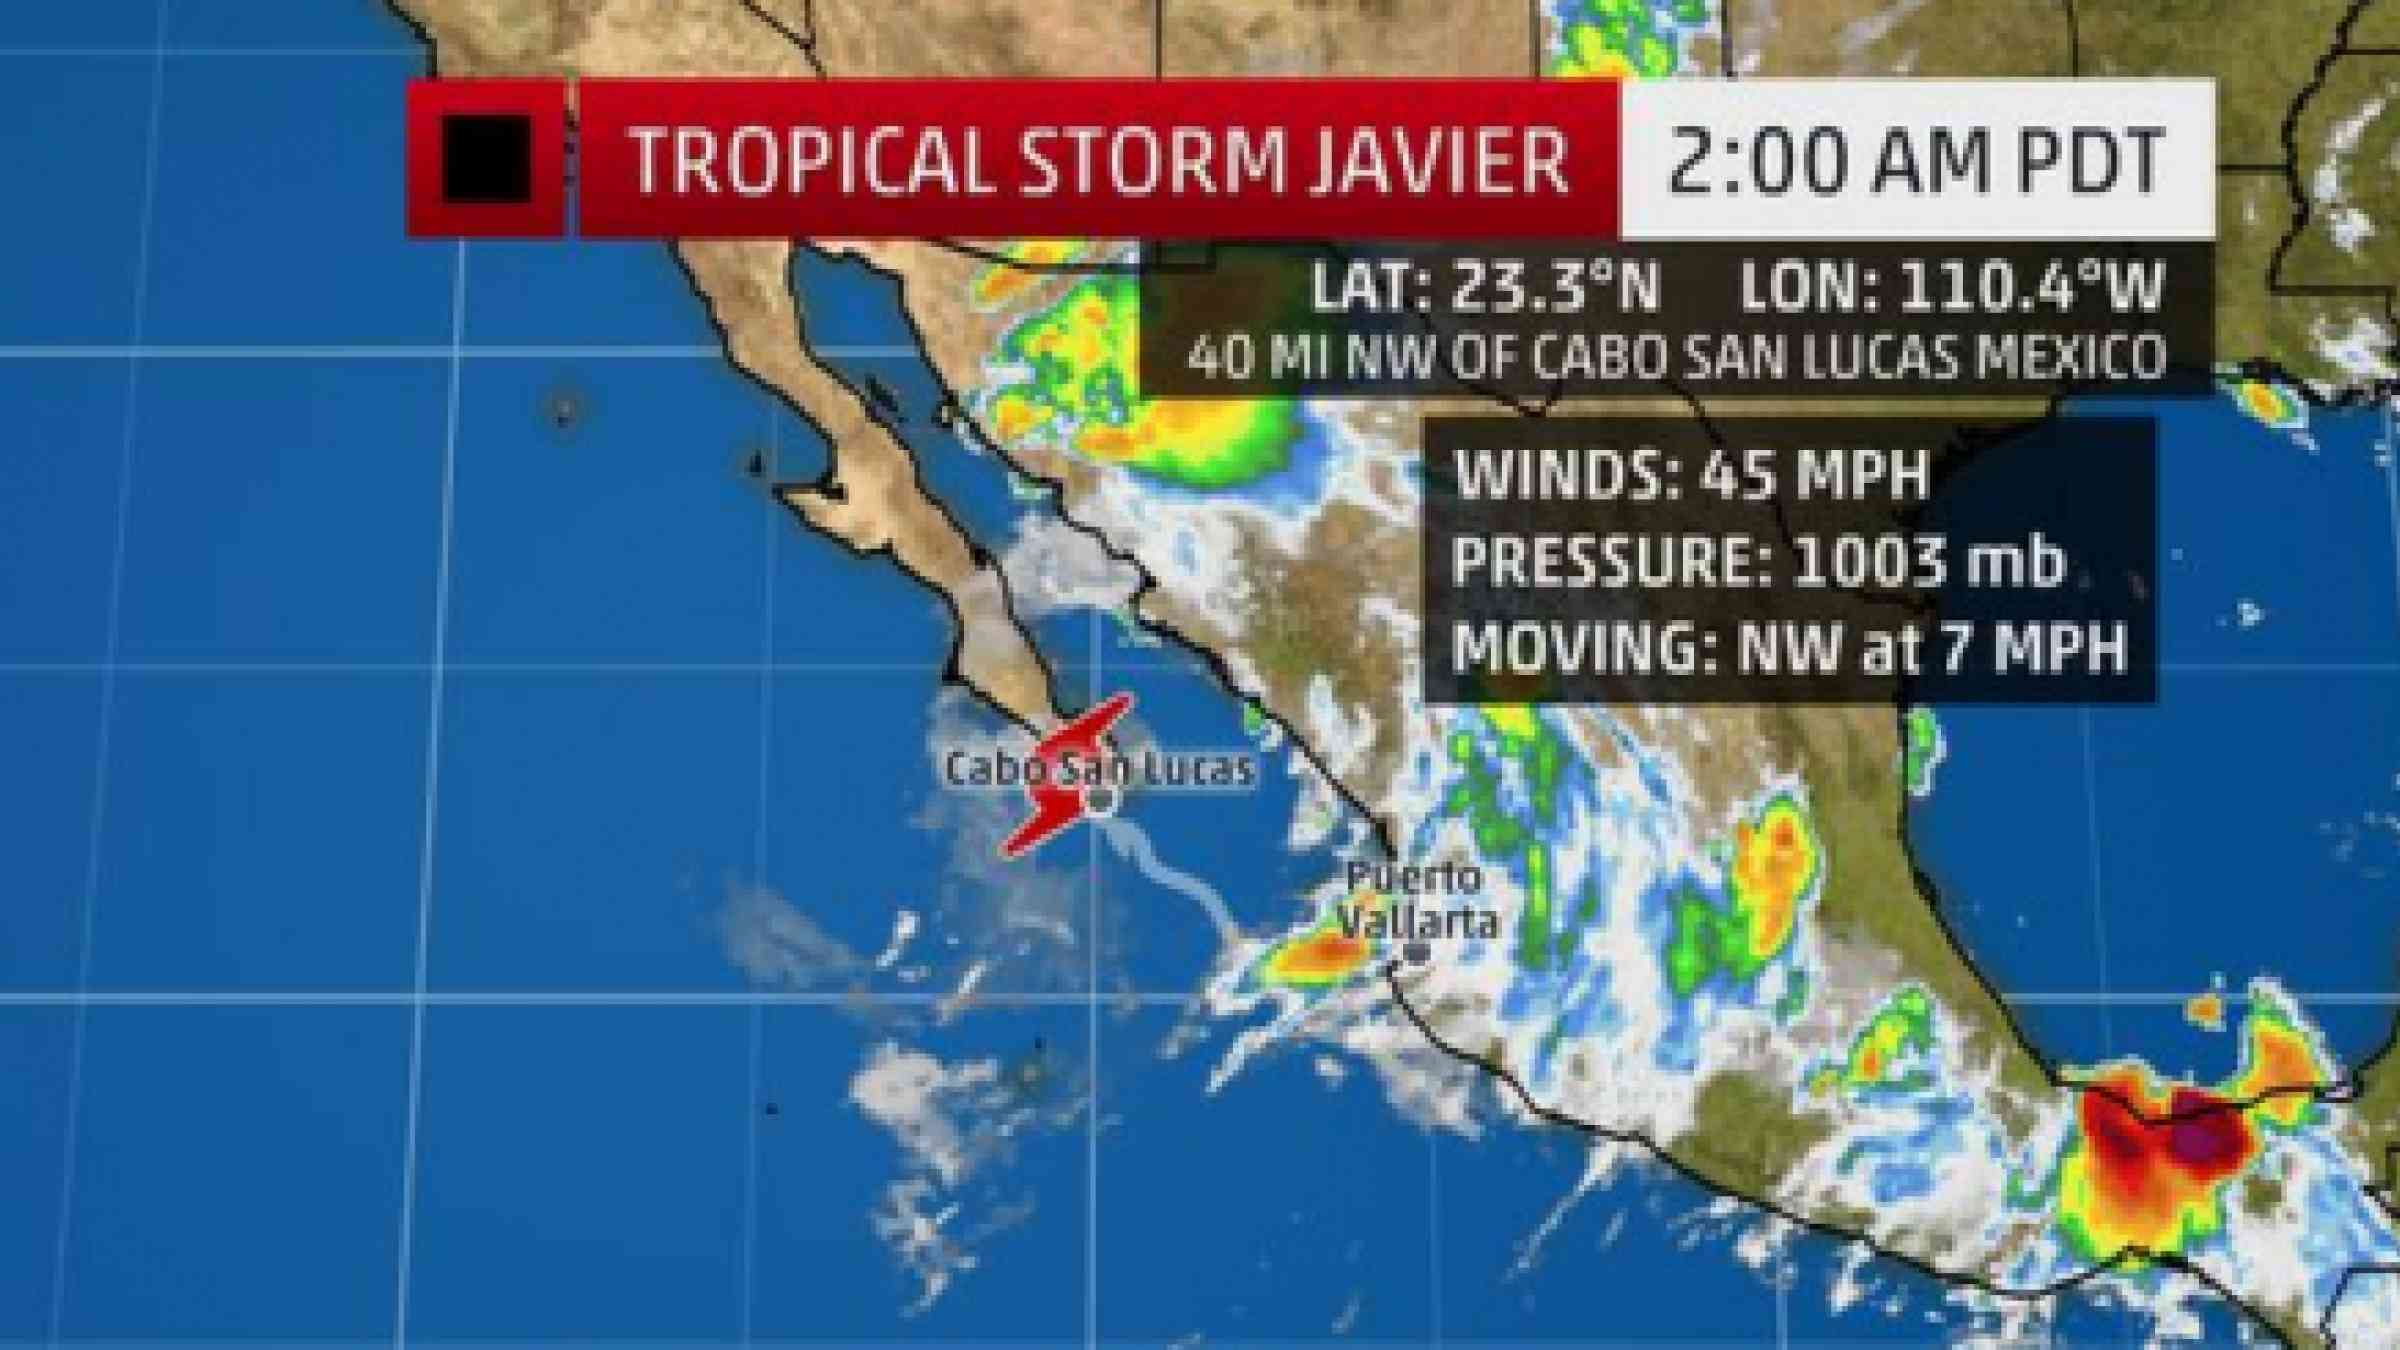 Mexico is on alert for Tropical Storm Javier which is threatening its Pacific coast with torrential rain and heavy seas.